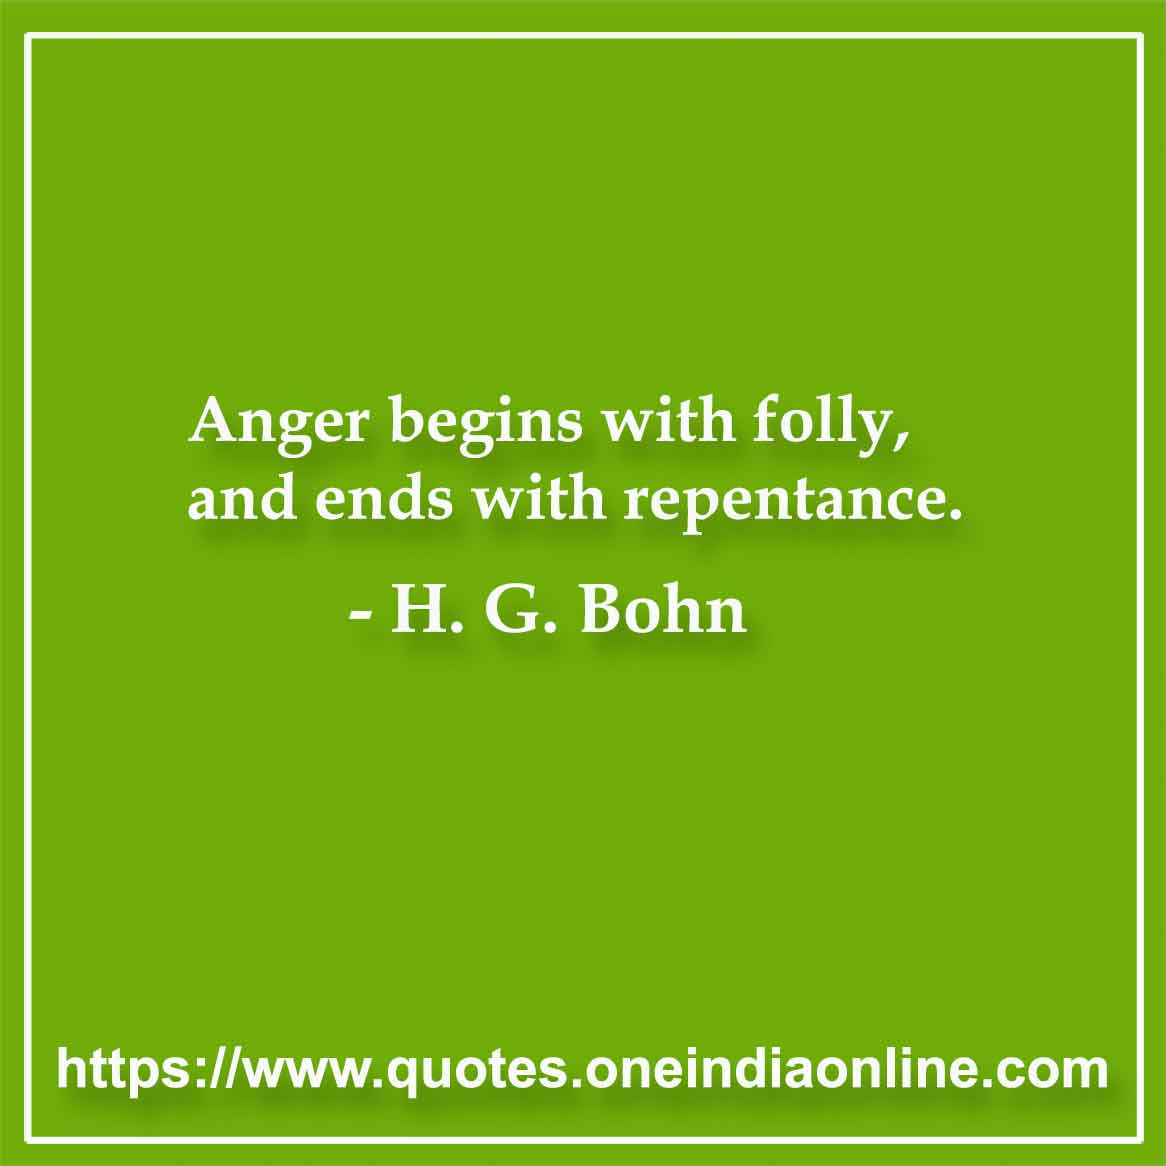 Anger begins with folly, and ends with repentance.

- Beverly Sills